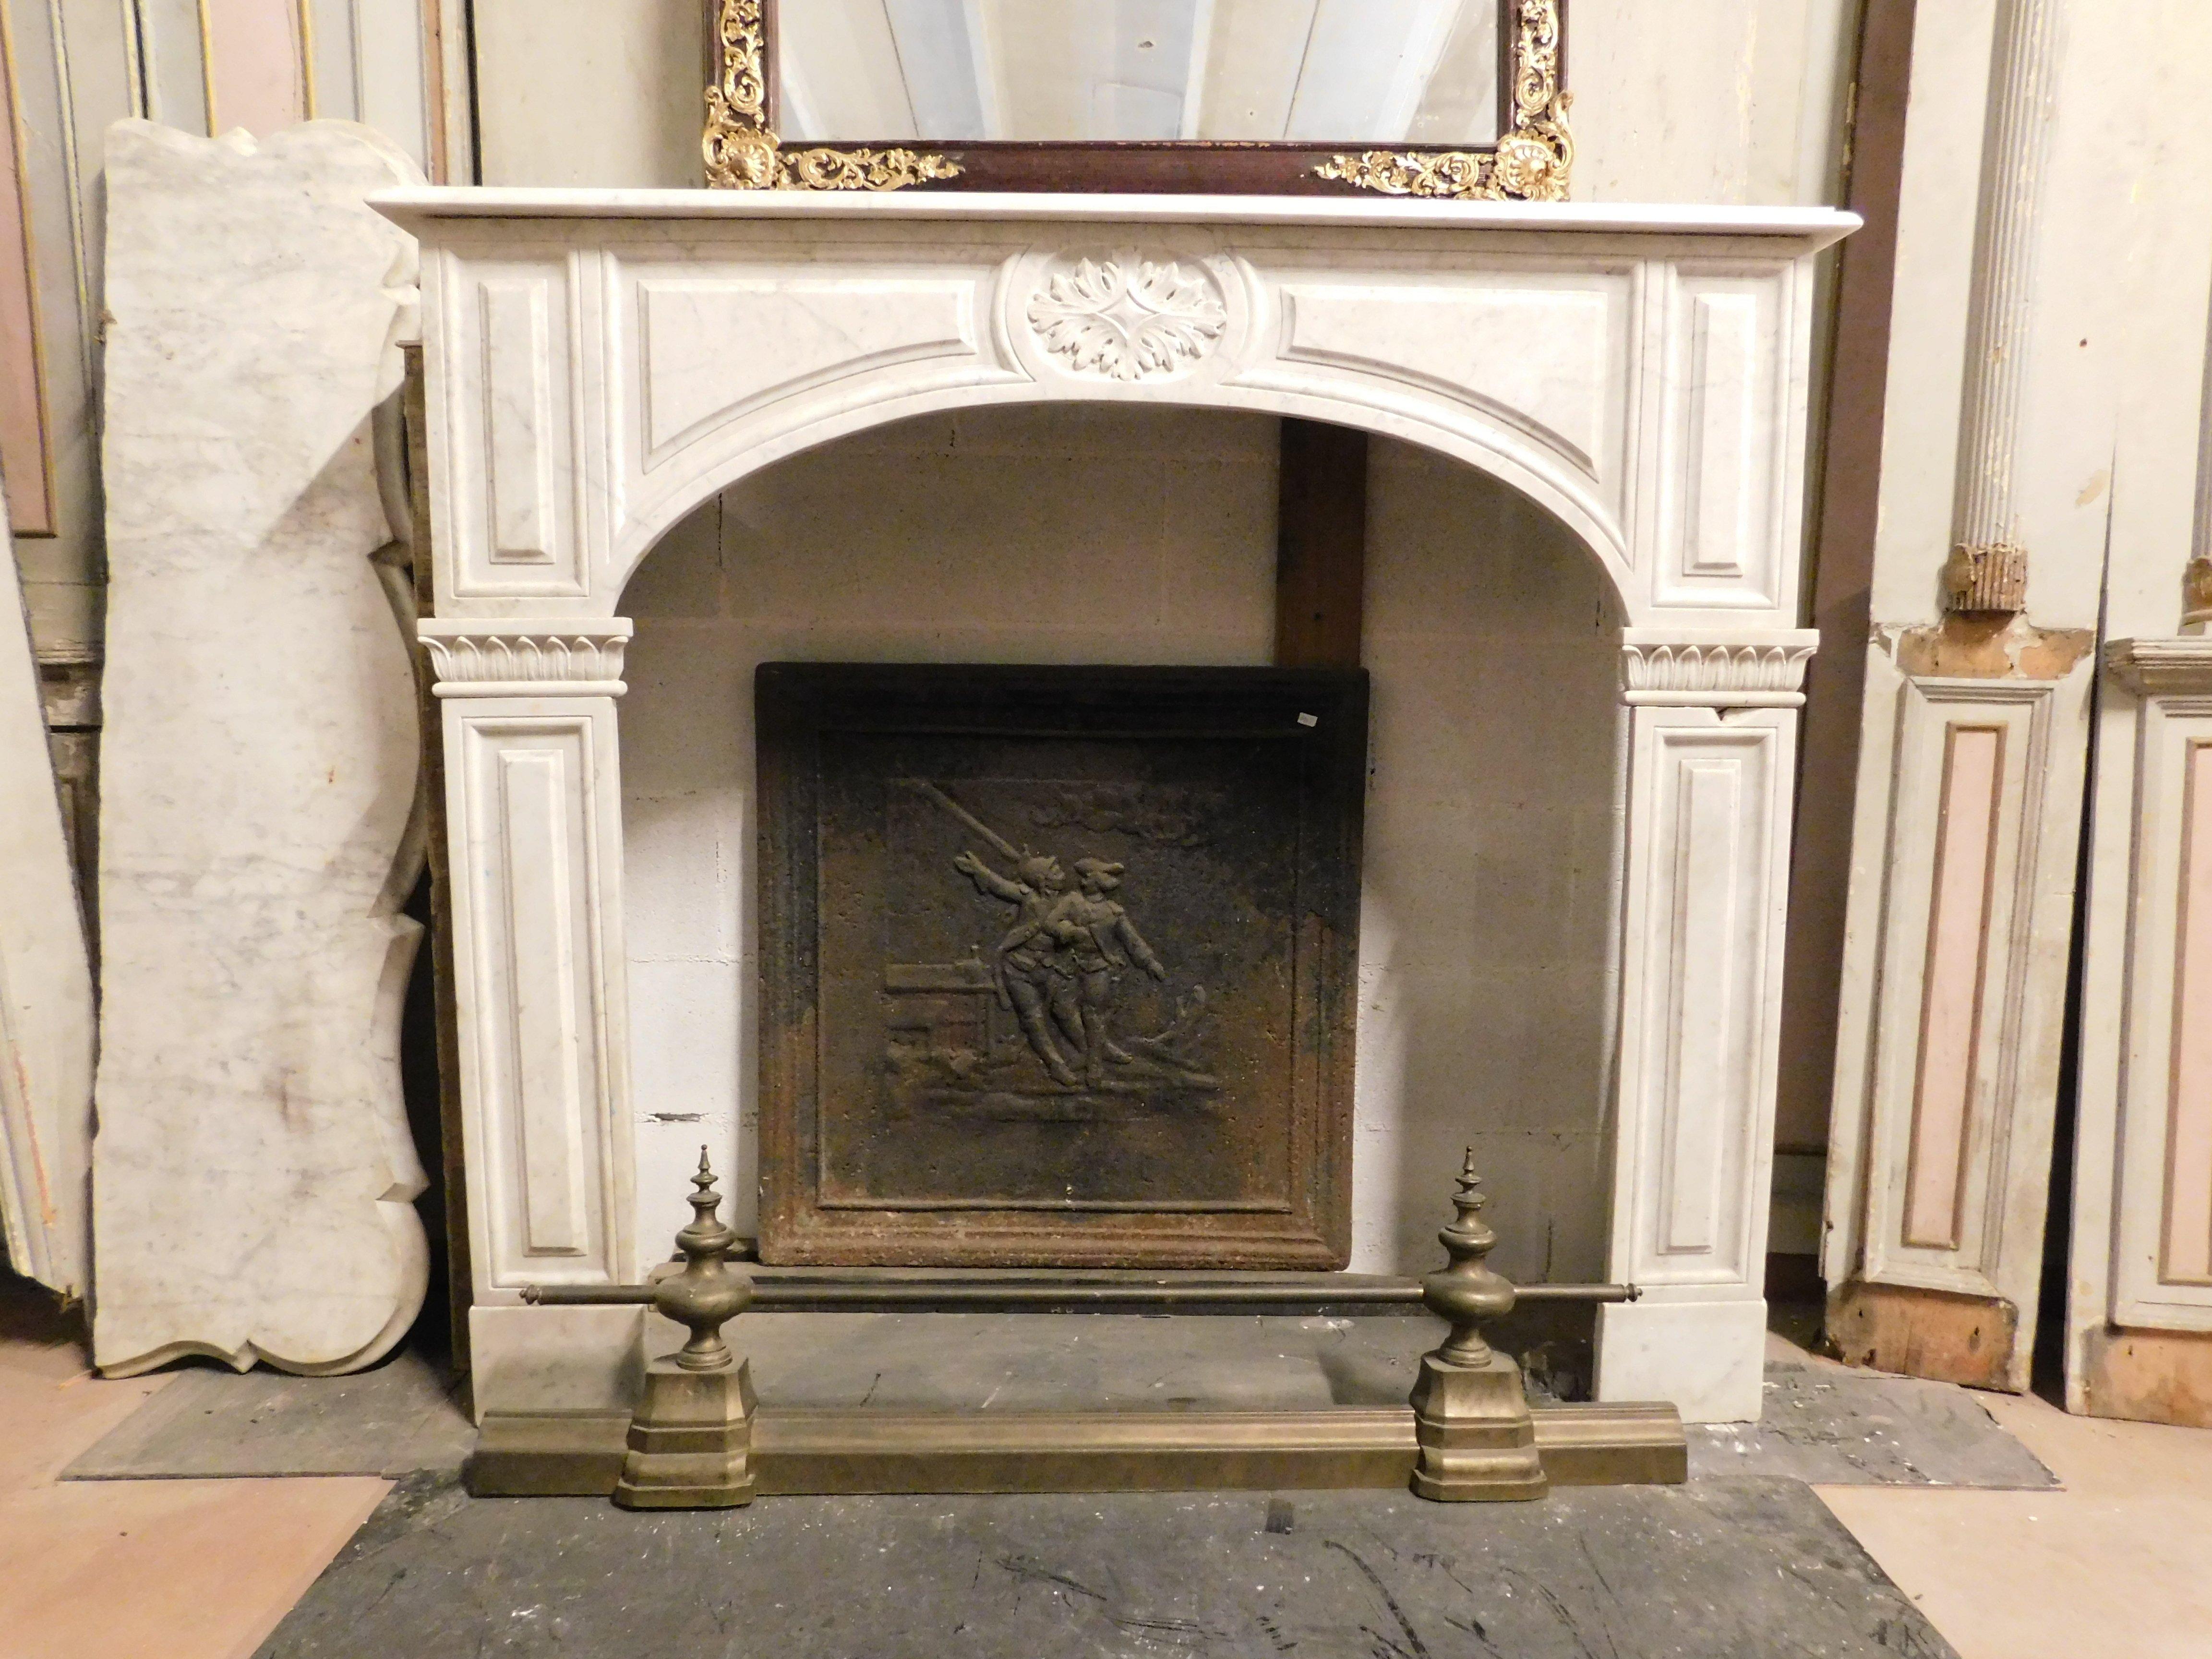 Antique fireplace in white marble, hand carved. coming from a prestigious building in Turin, made by expert craftsmen in the 1800s.
Savoyard elegance and refined shapes make it tasteful for any type of furniture. It can be used in lounges or dining